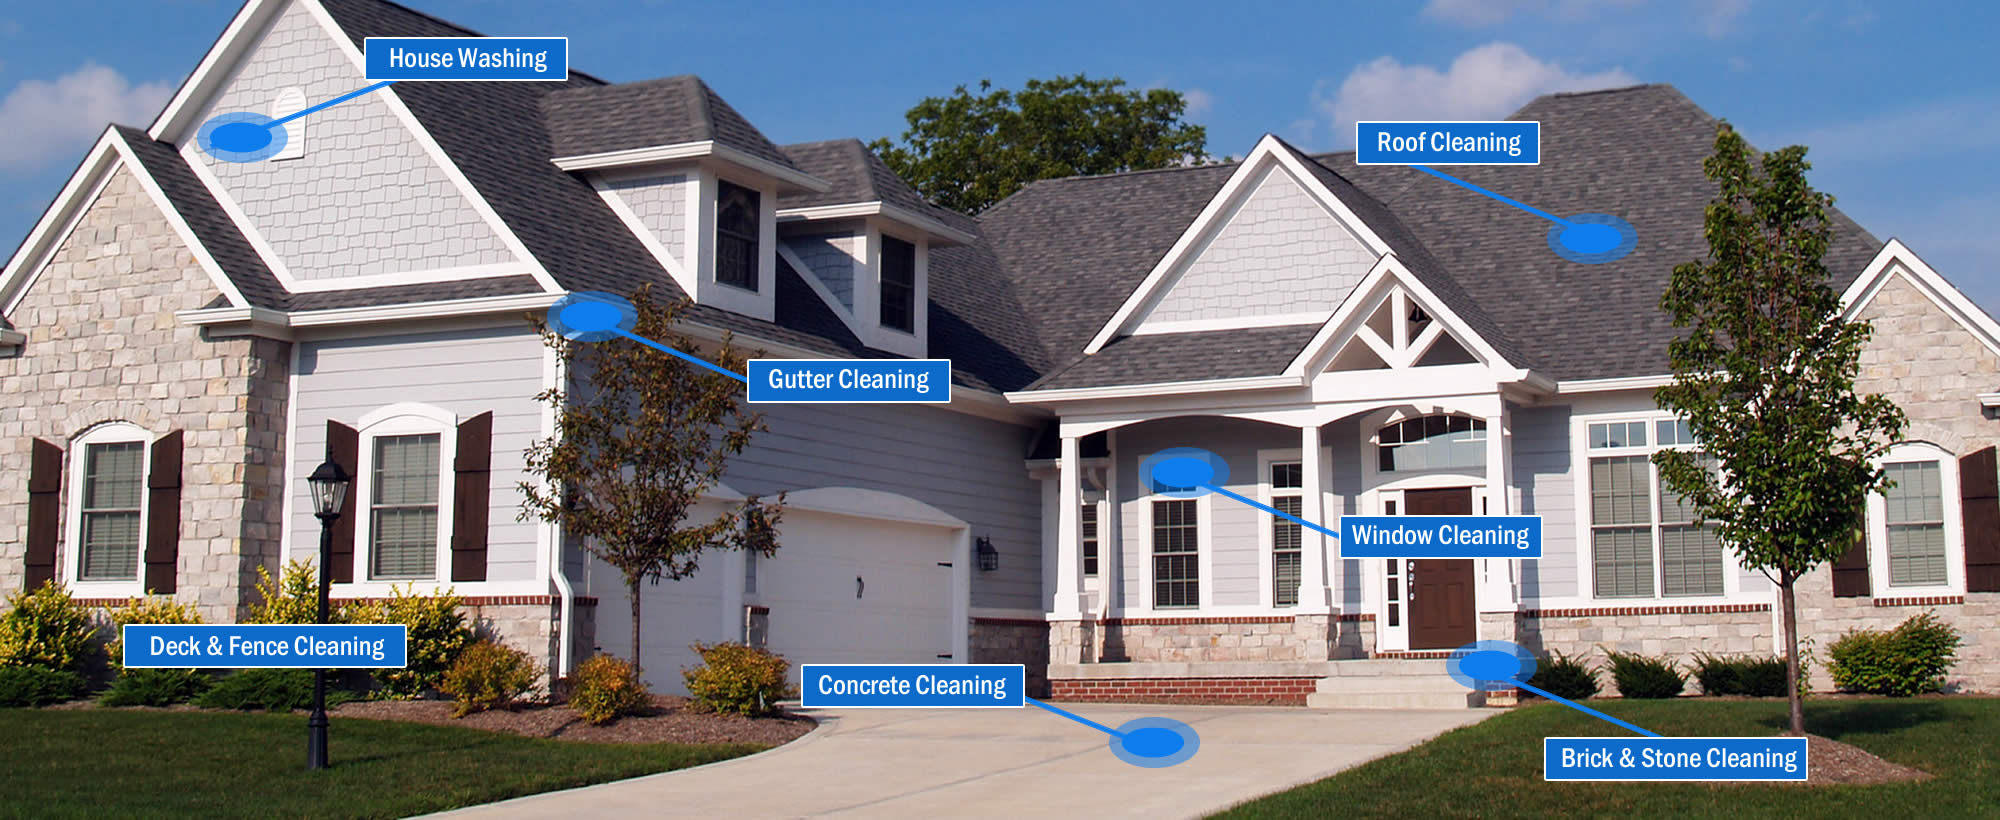 Professional Home Soft Washing Services